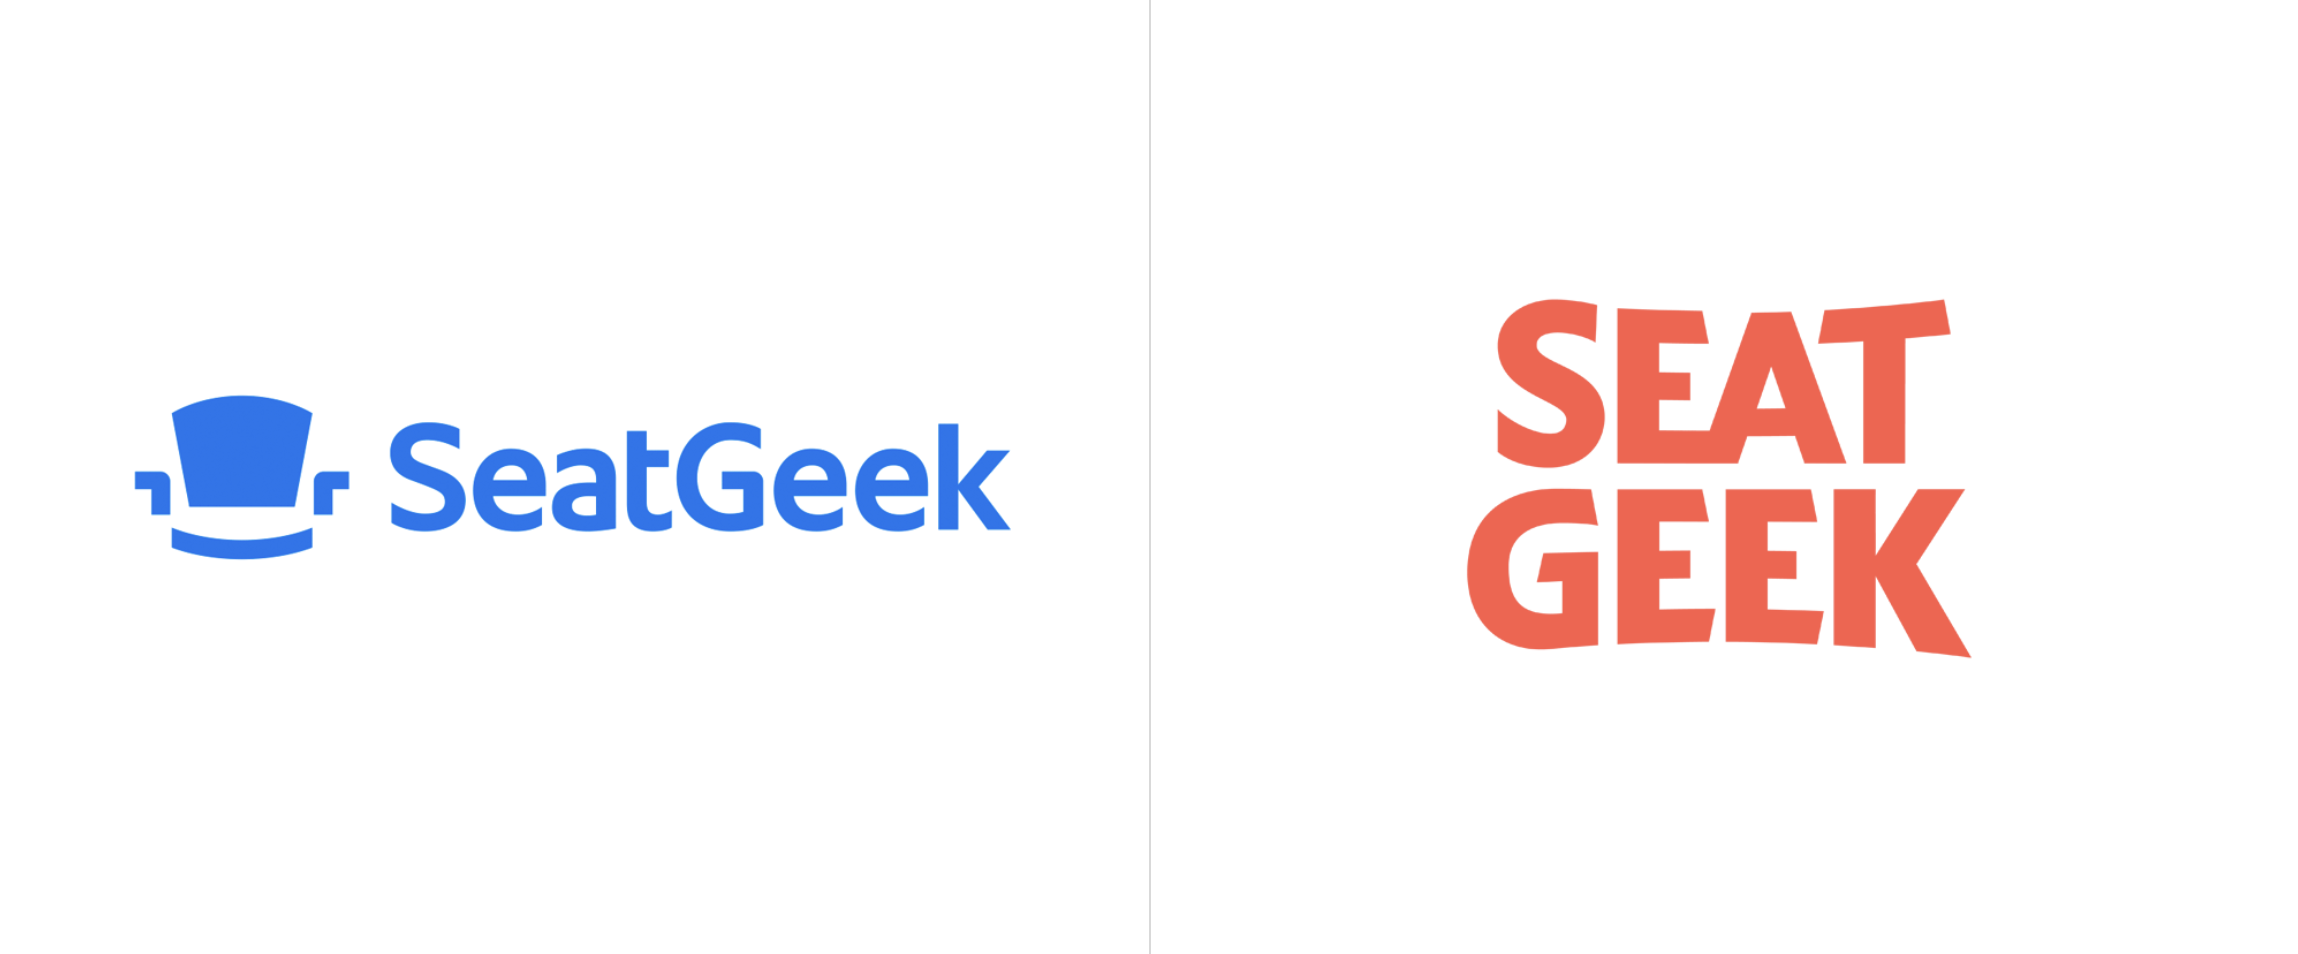 Seatgeek logo redesign before and after